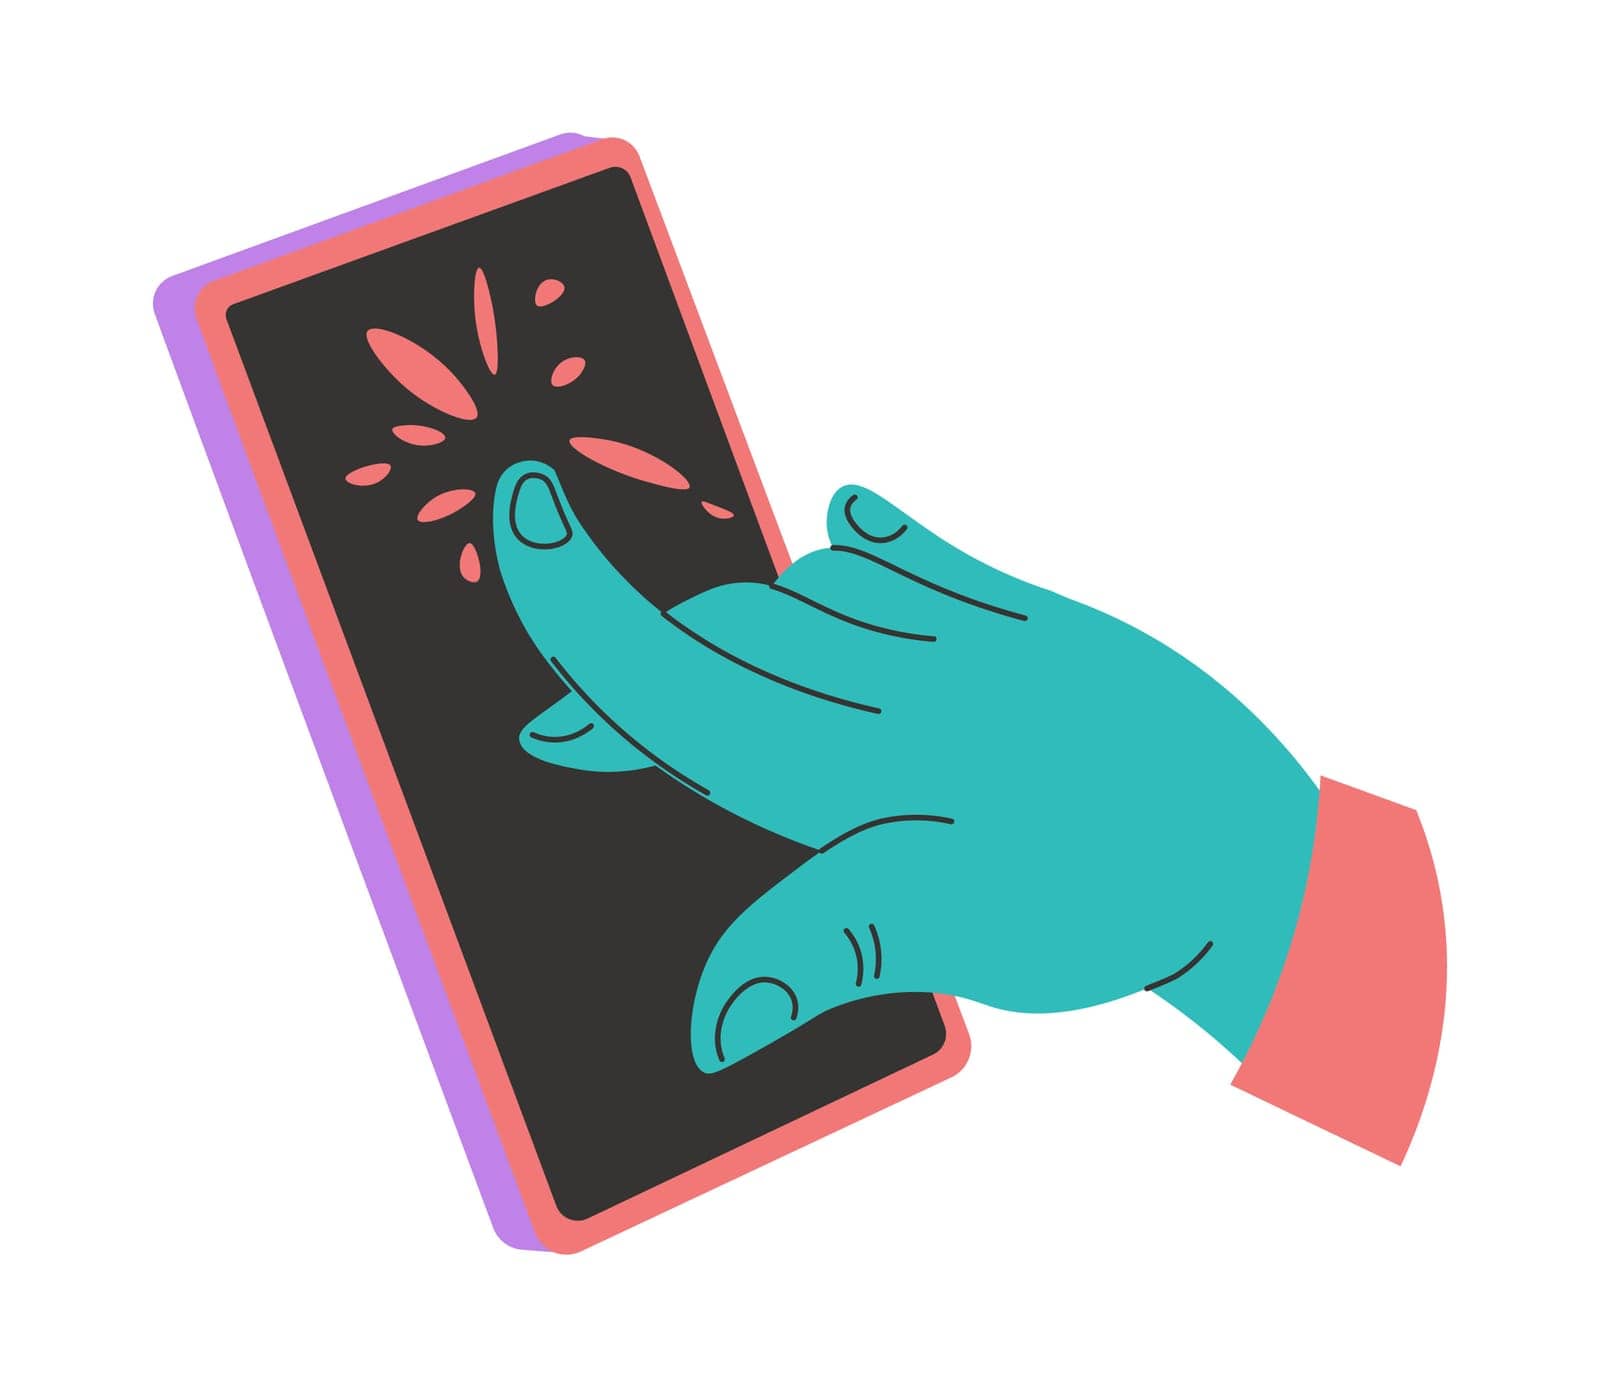 Interaction with gadgets and modern devices, hand touching screen of smartphone or mobile phone. Communication and messaging in internet, cyberspace and virtual reality. Vector in flat style